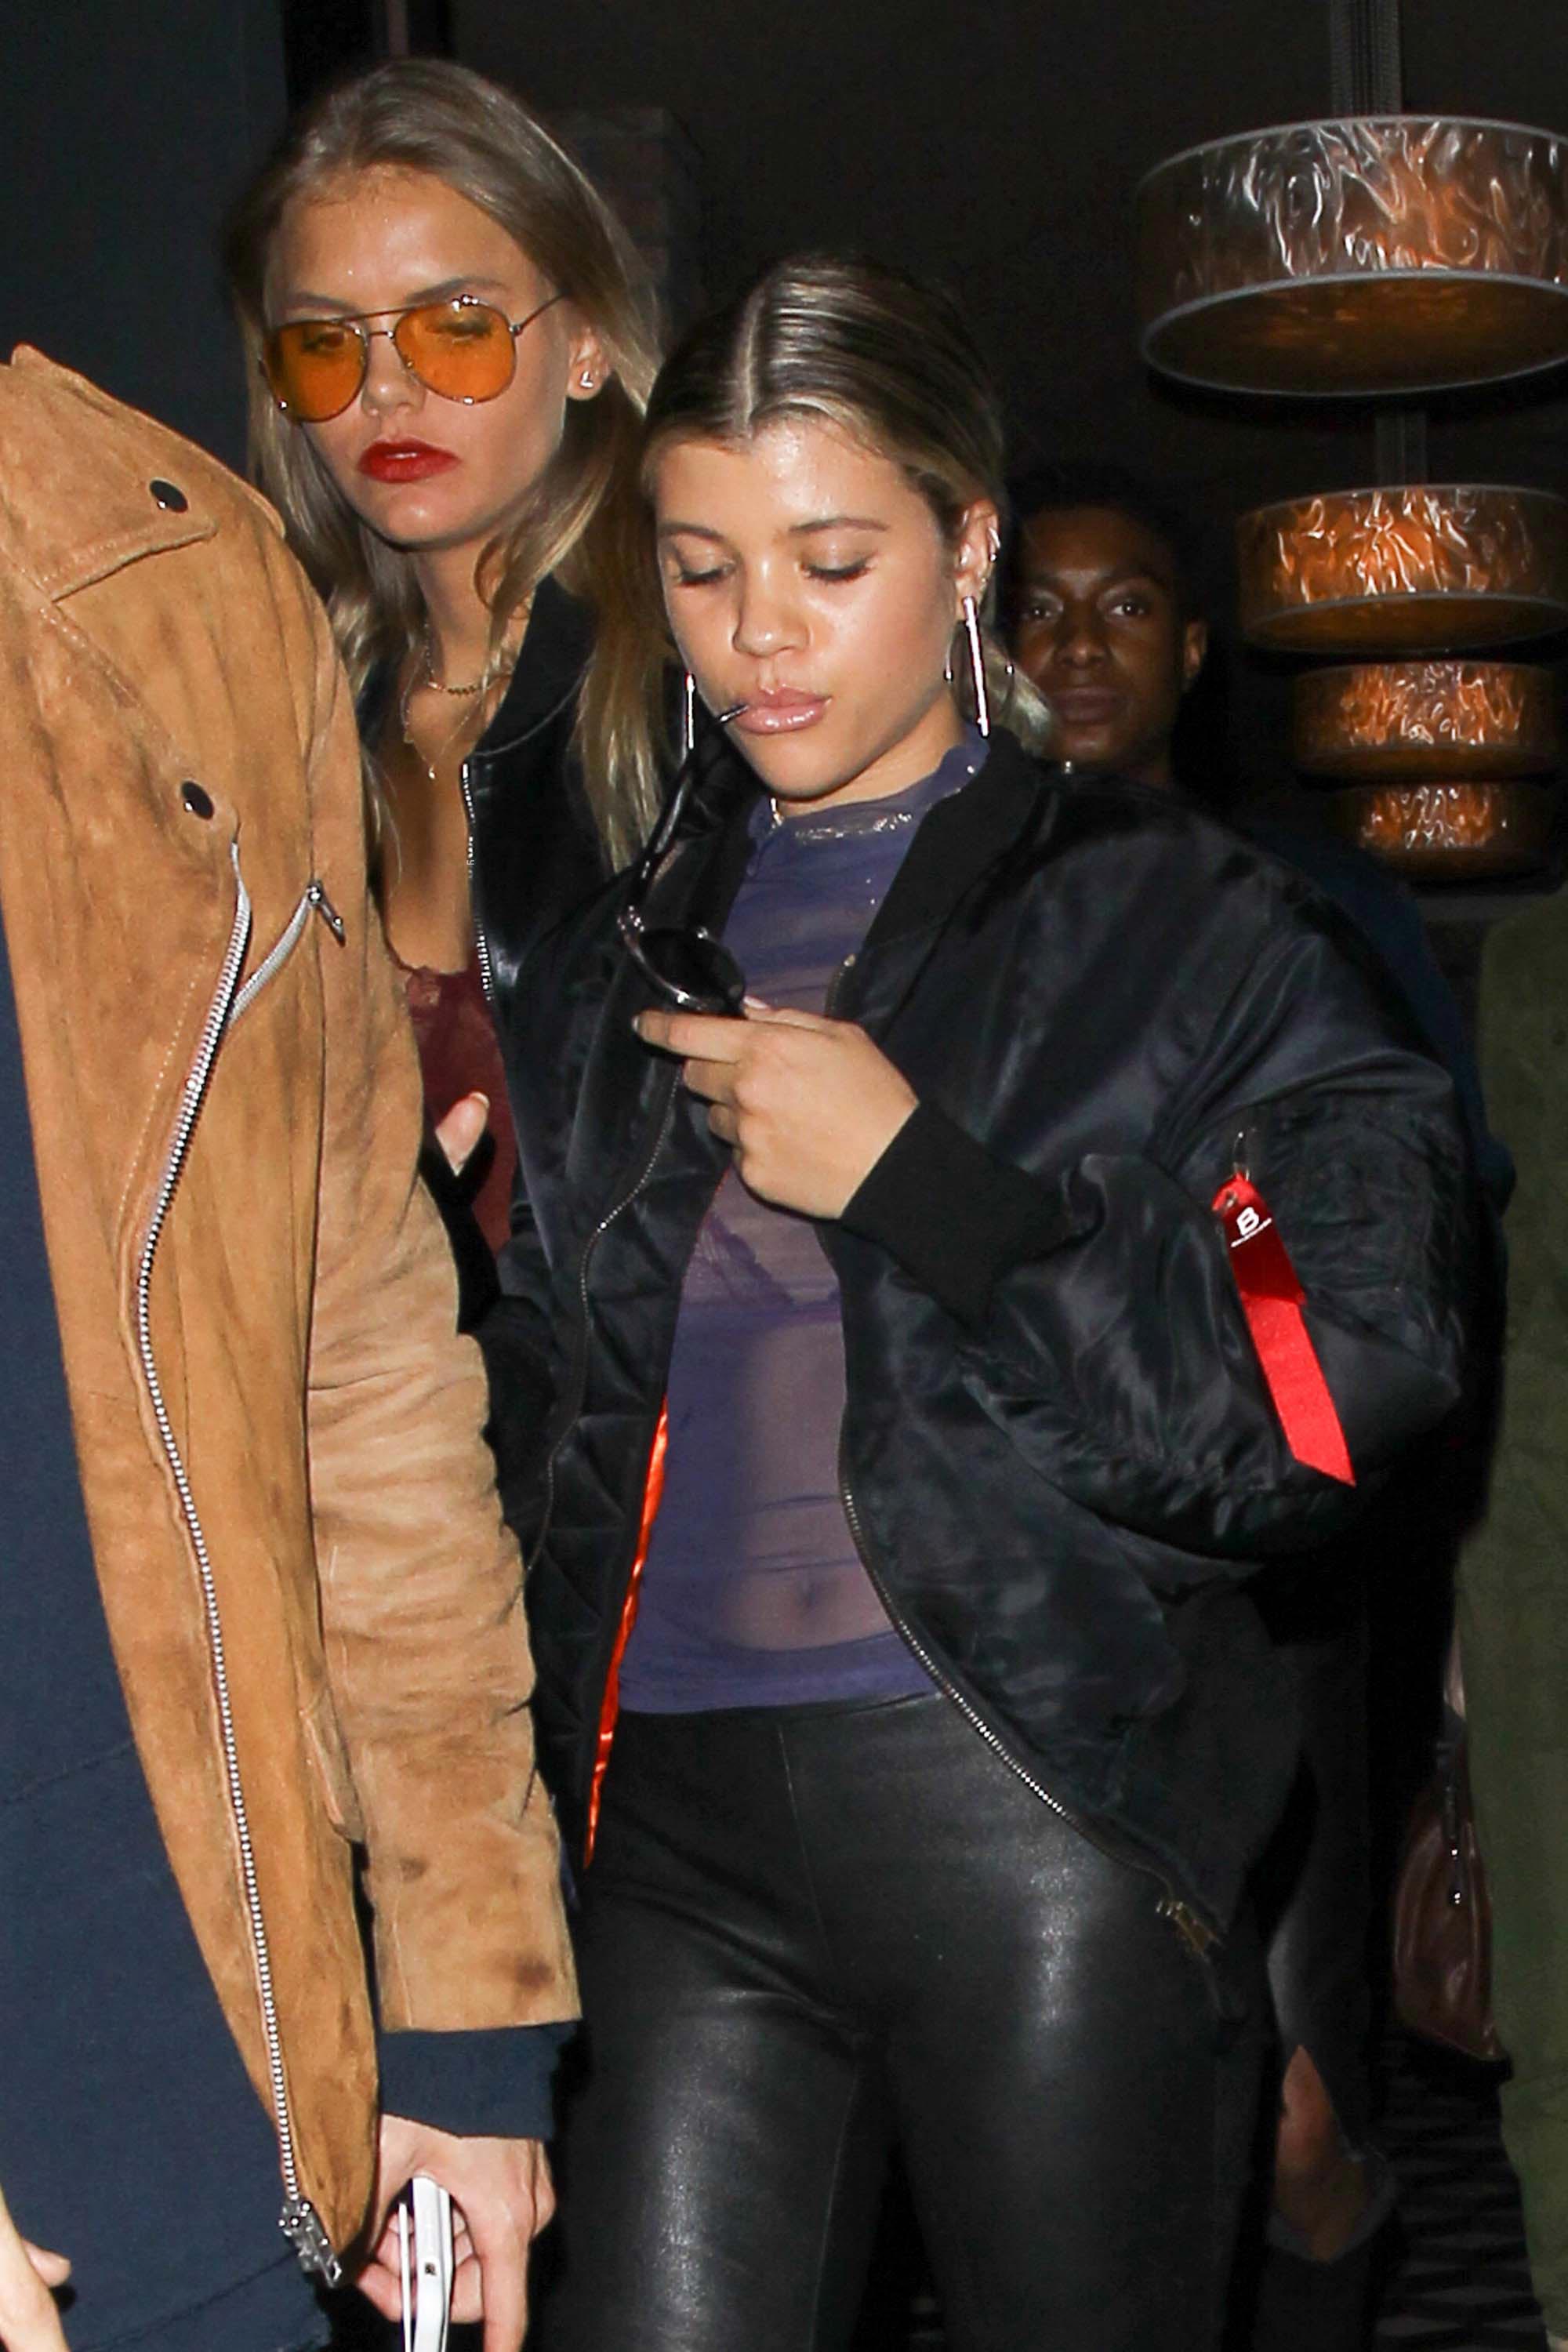 Sofia Richie attends Kanye West concert